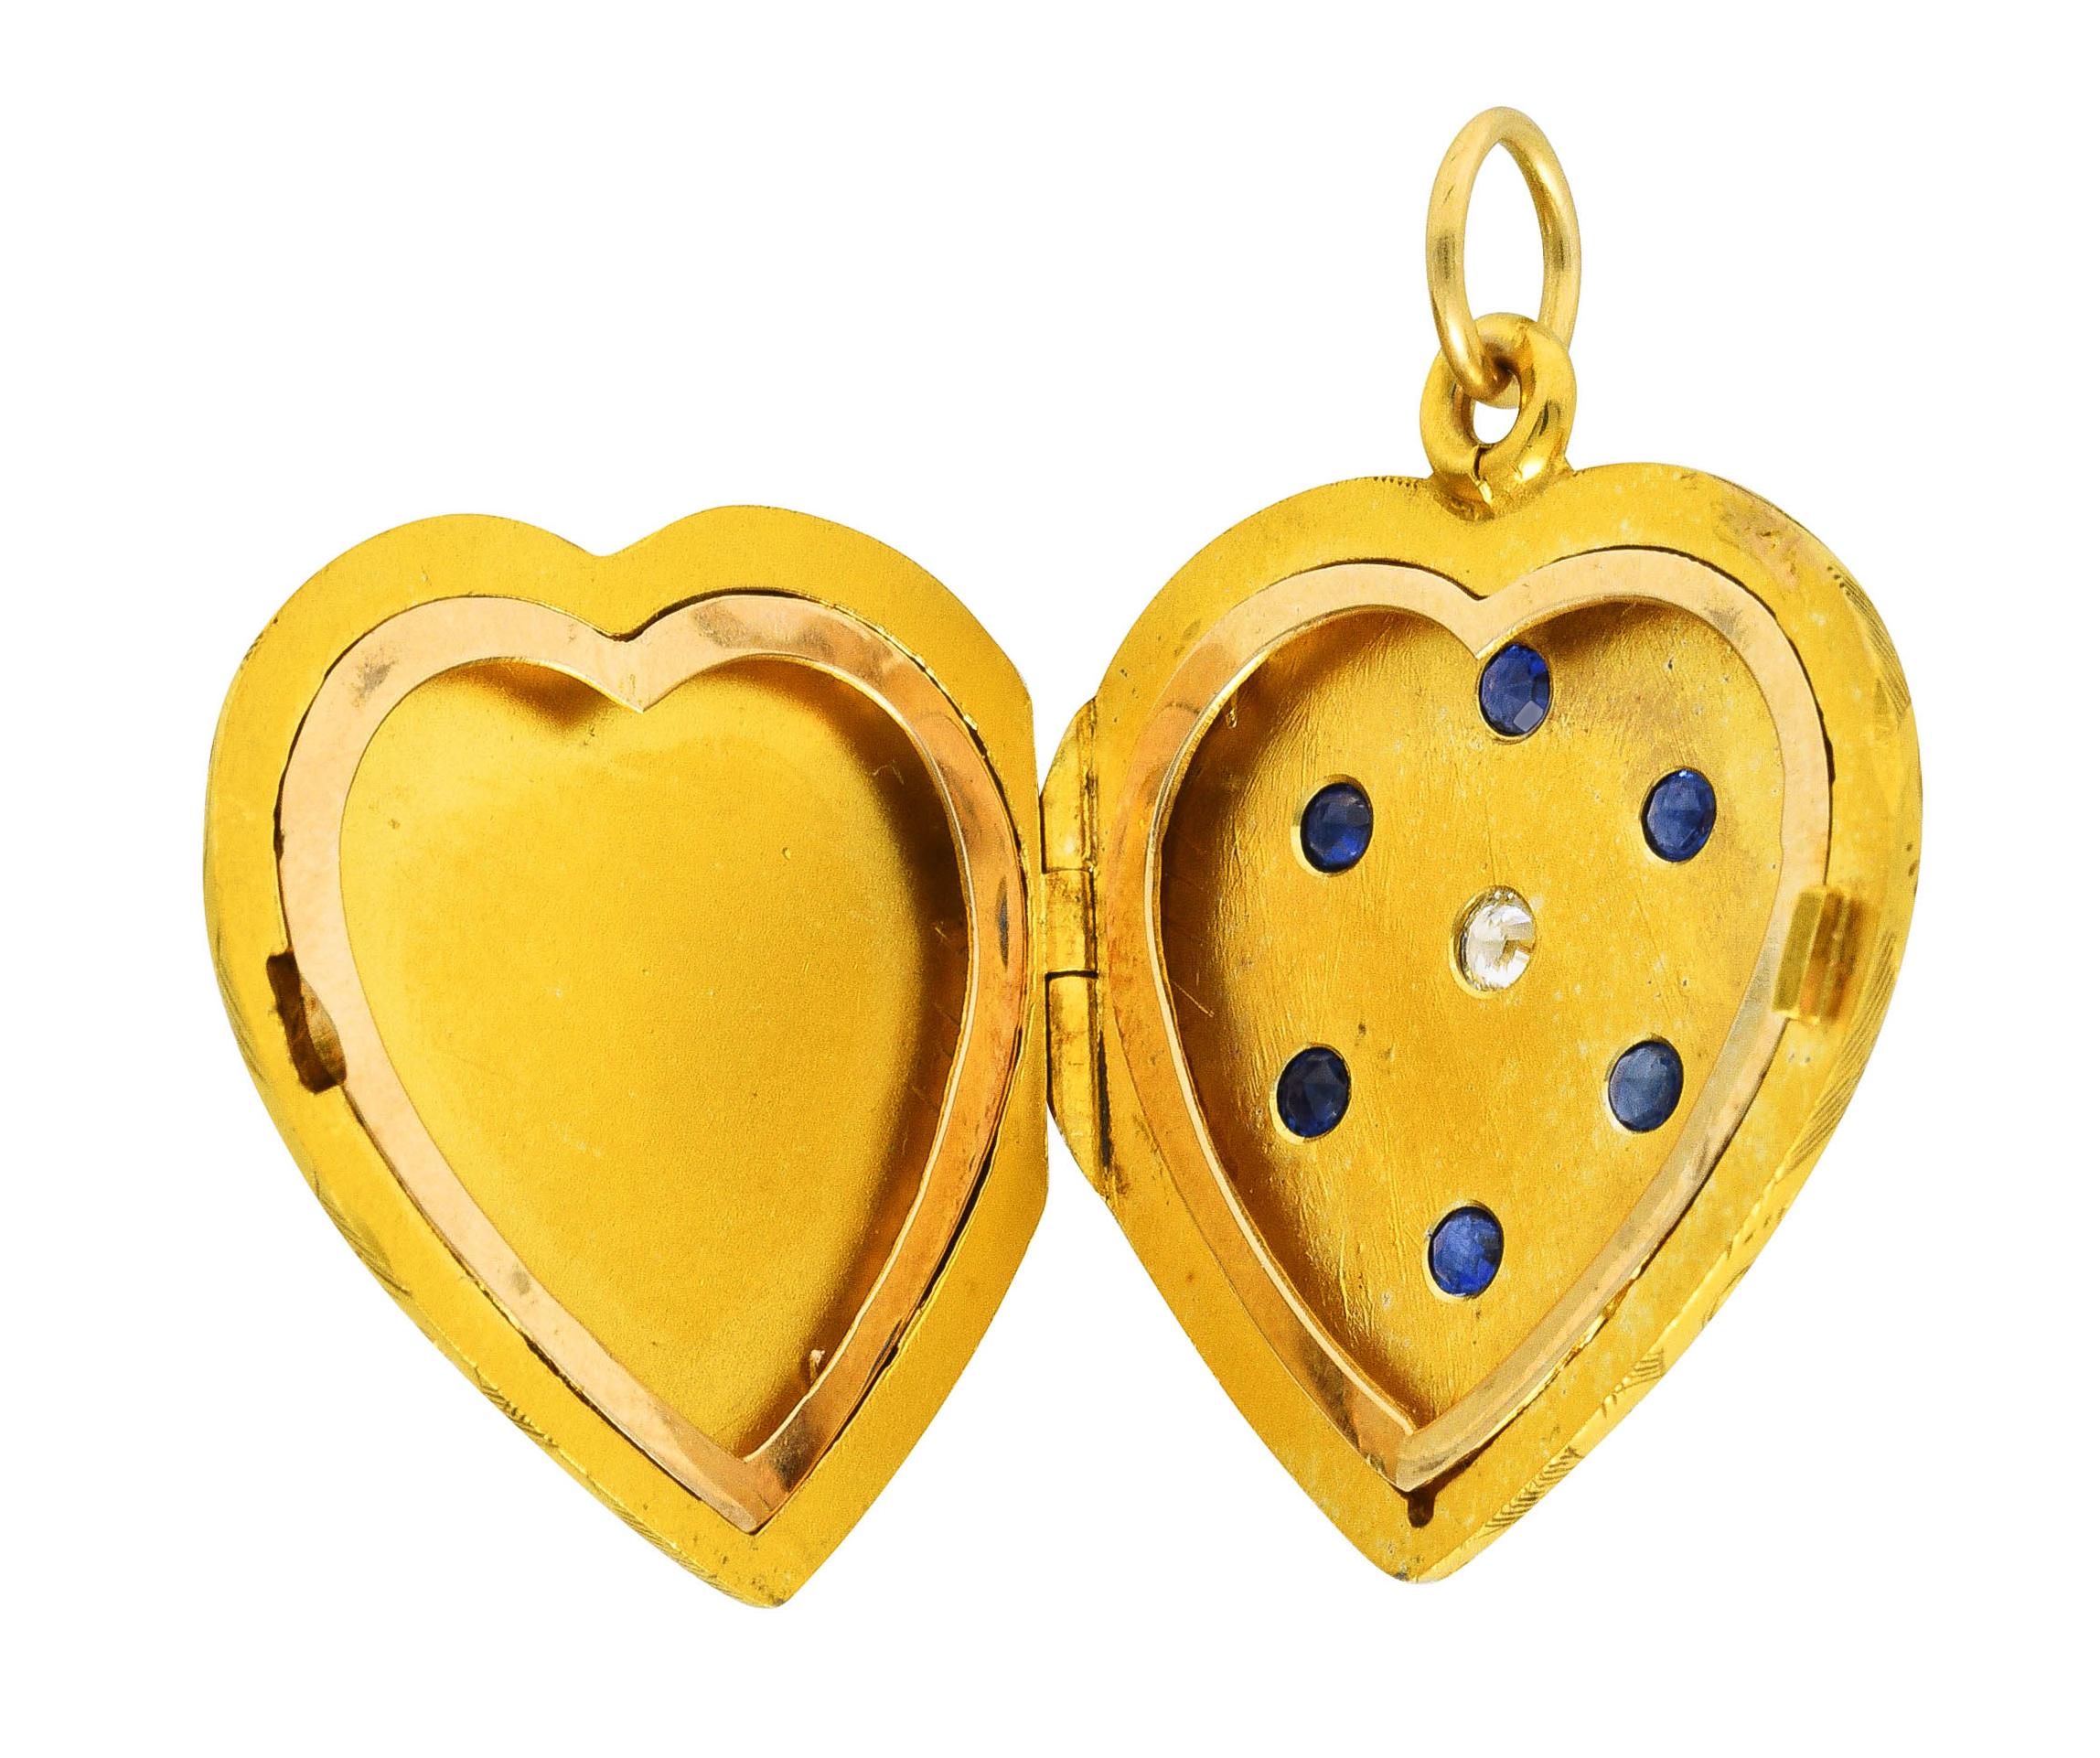 Pendant is designed as a heart shape centering a flush set old European cut diamond

Weighing approximately 0.10 carat total - eye clean and bright

Featuring a surround of six flush set round sapphires

Weighing approximately 0.55 carat total -